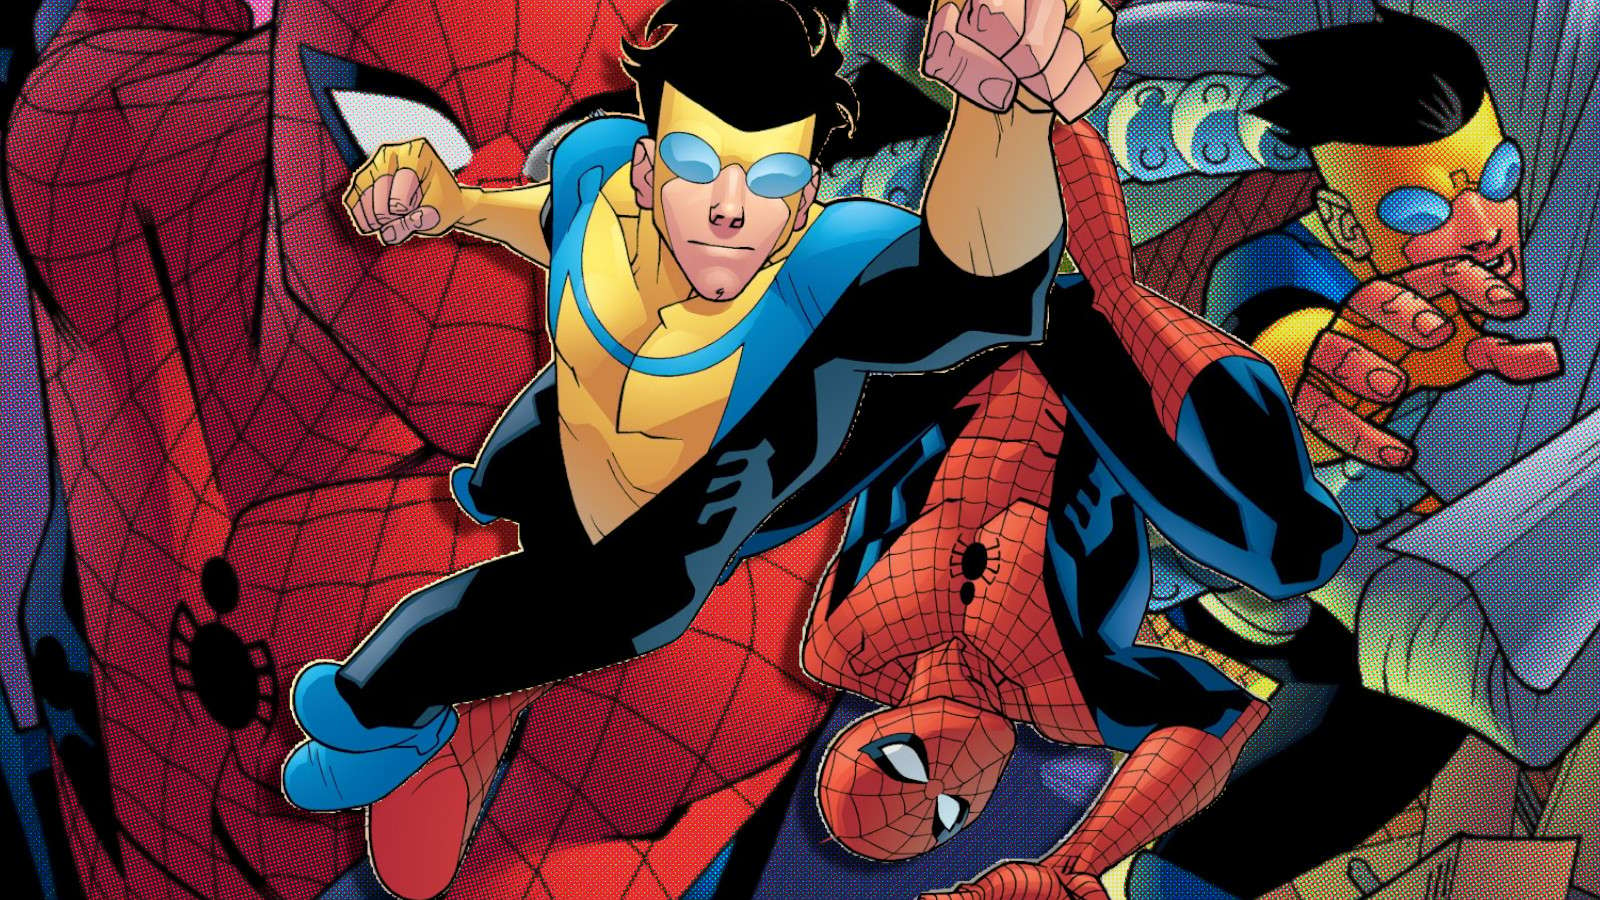 Invincible and Spider-Man